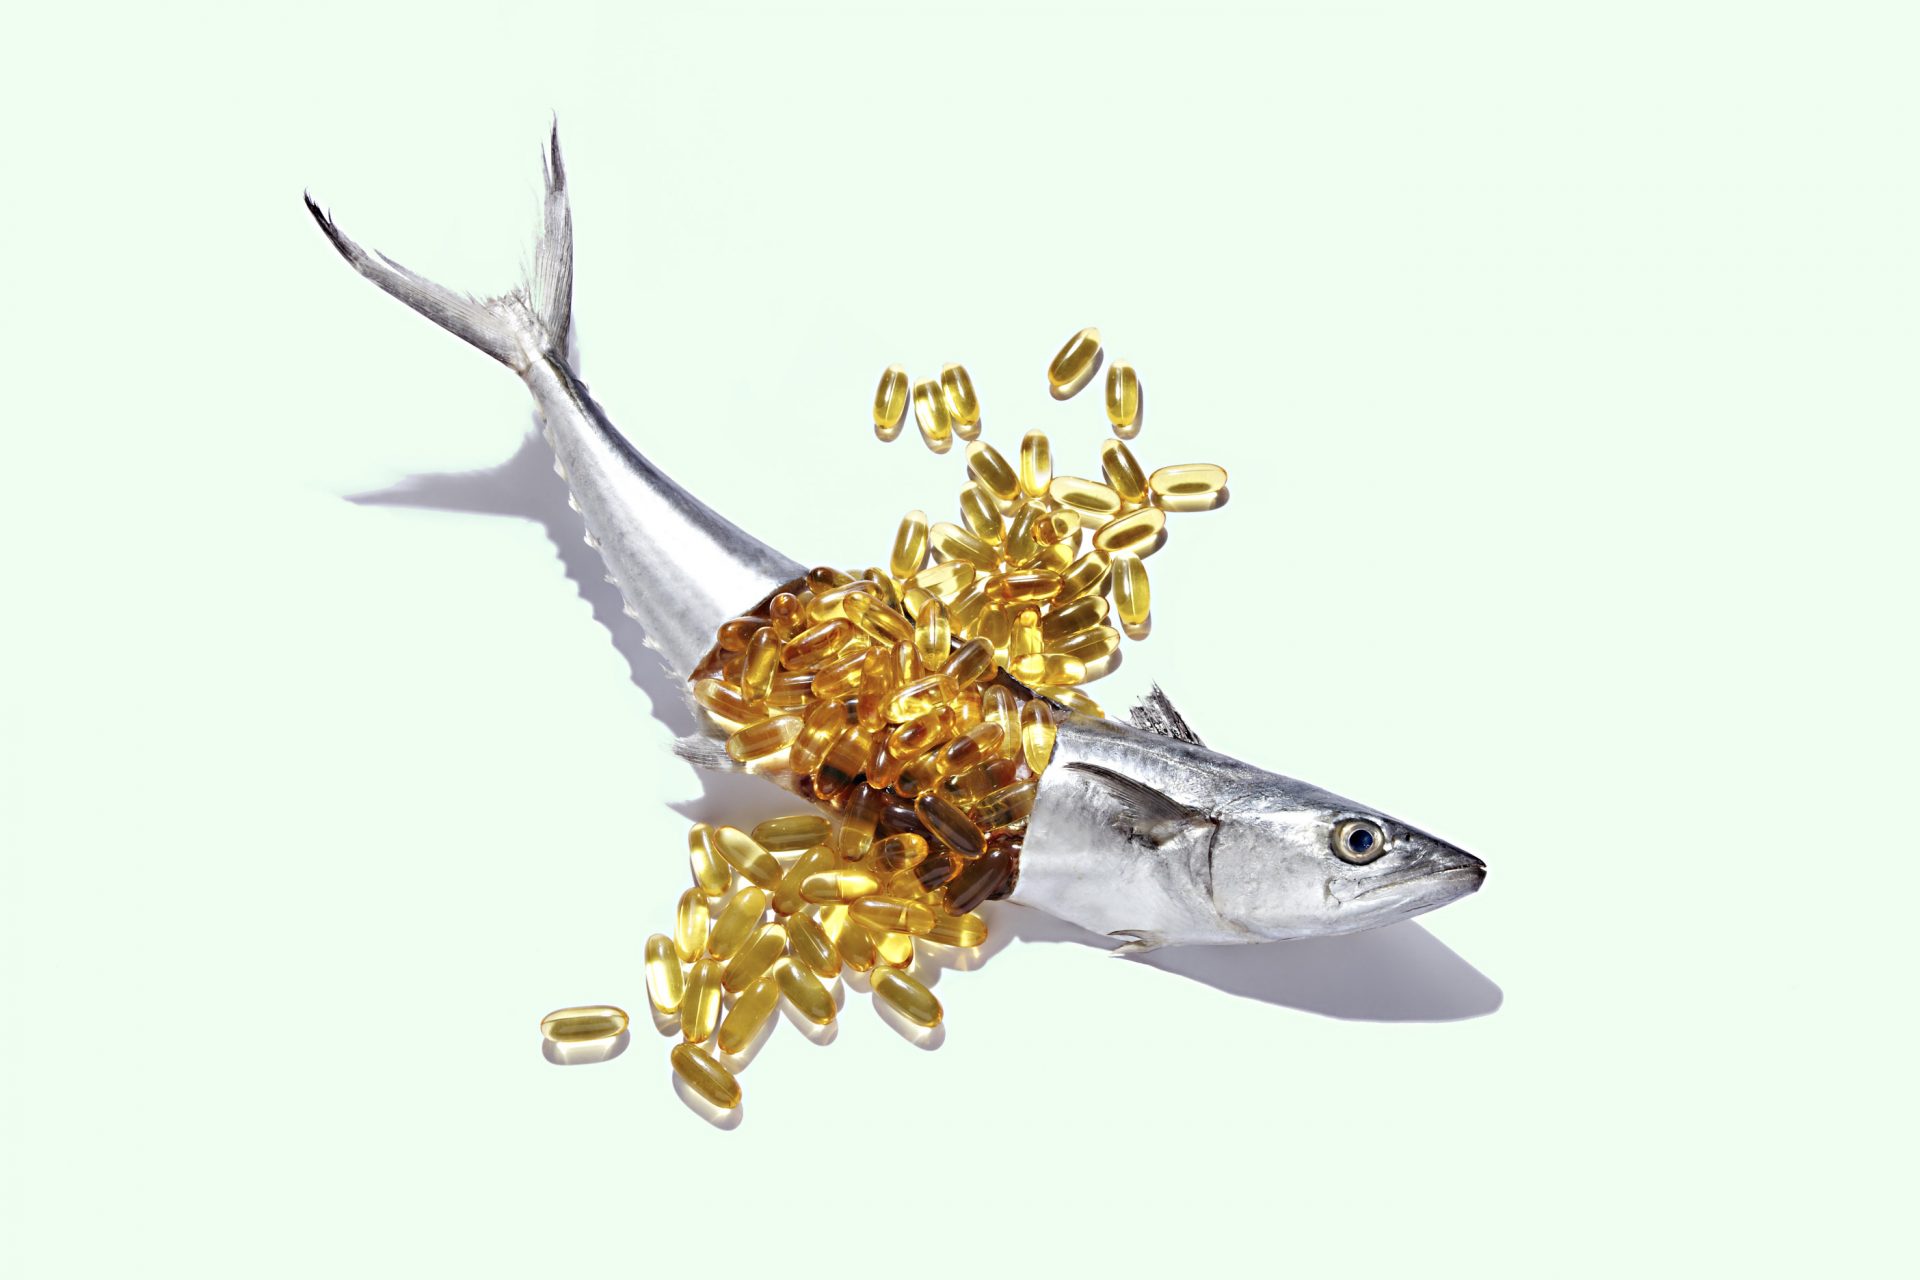 There's something fishy about fish oil supplements study finds